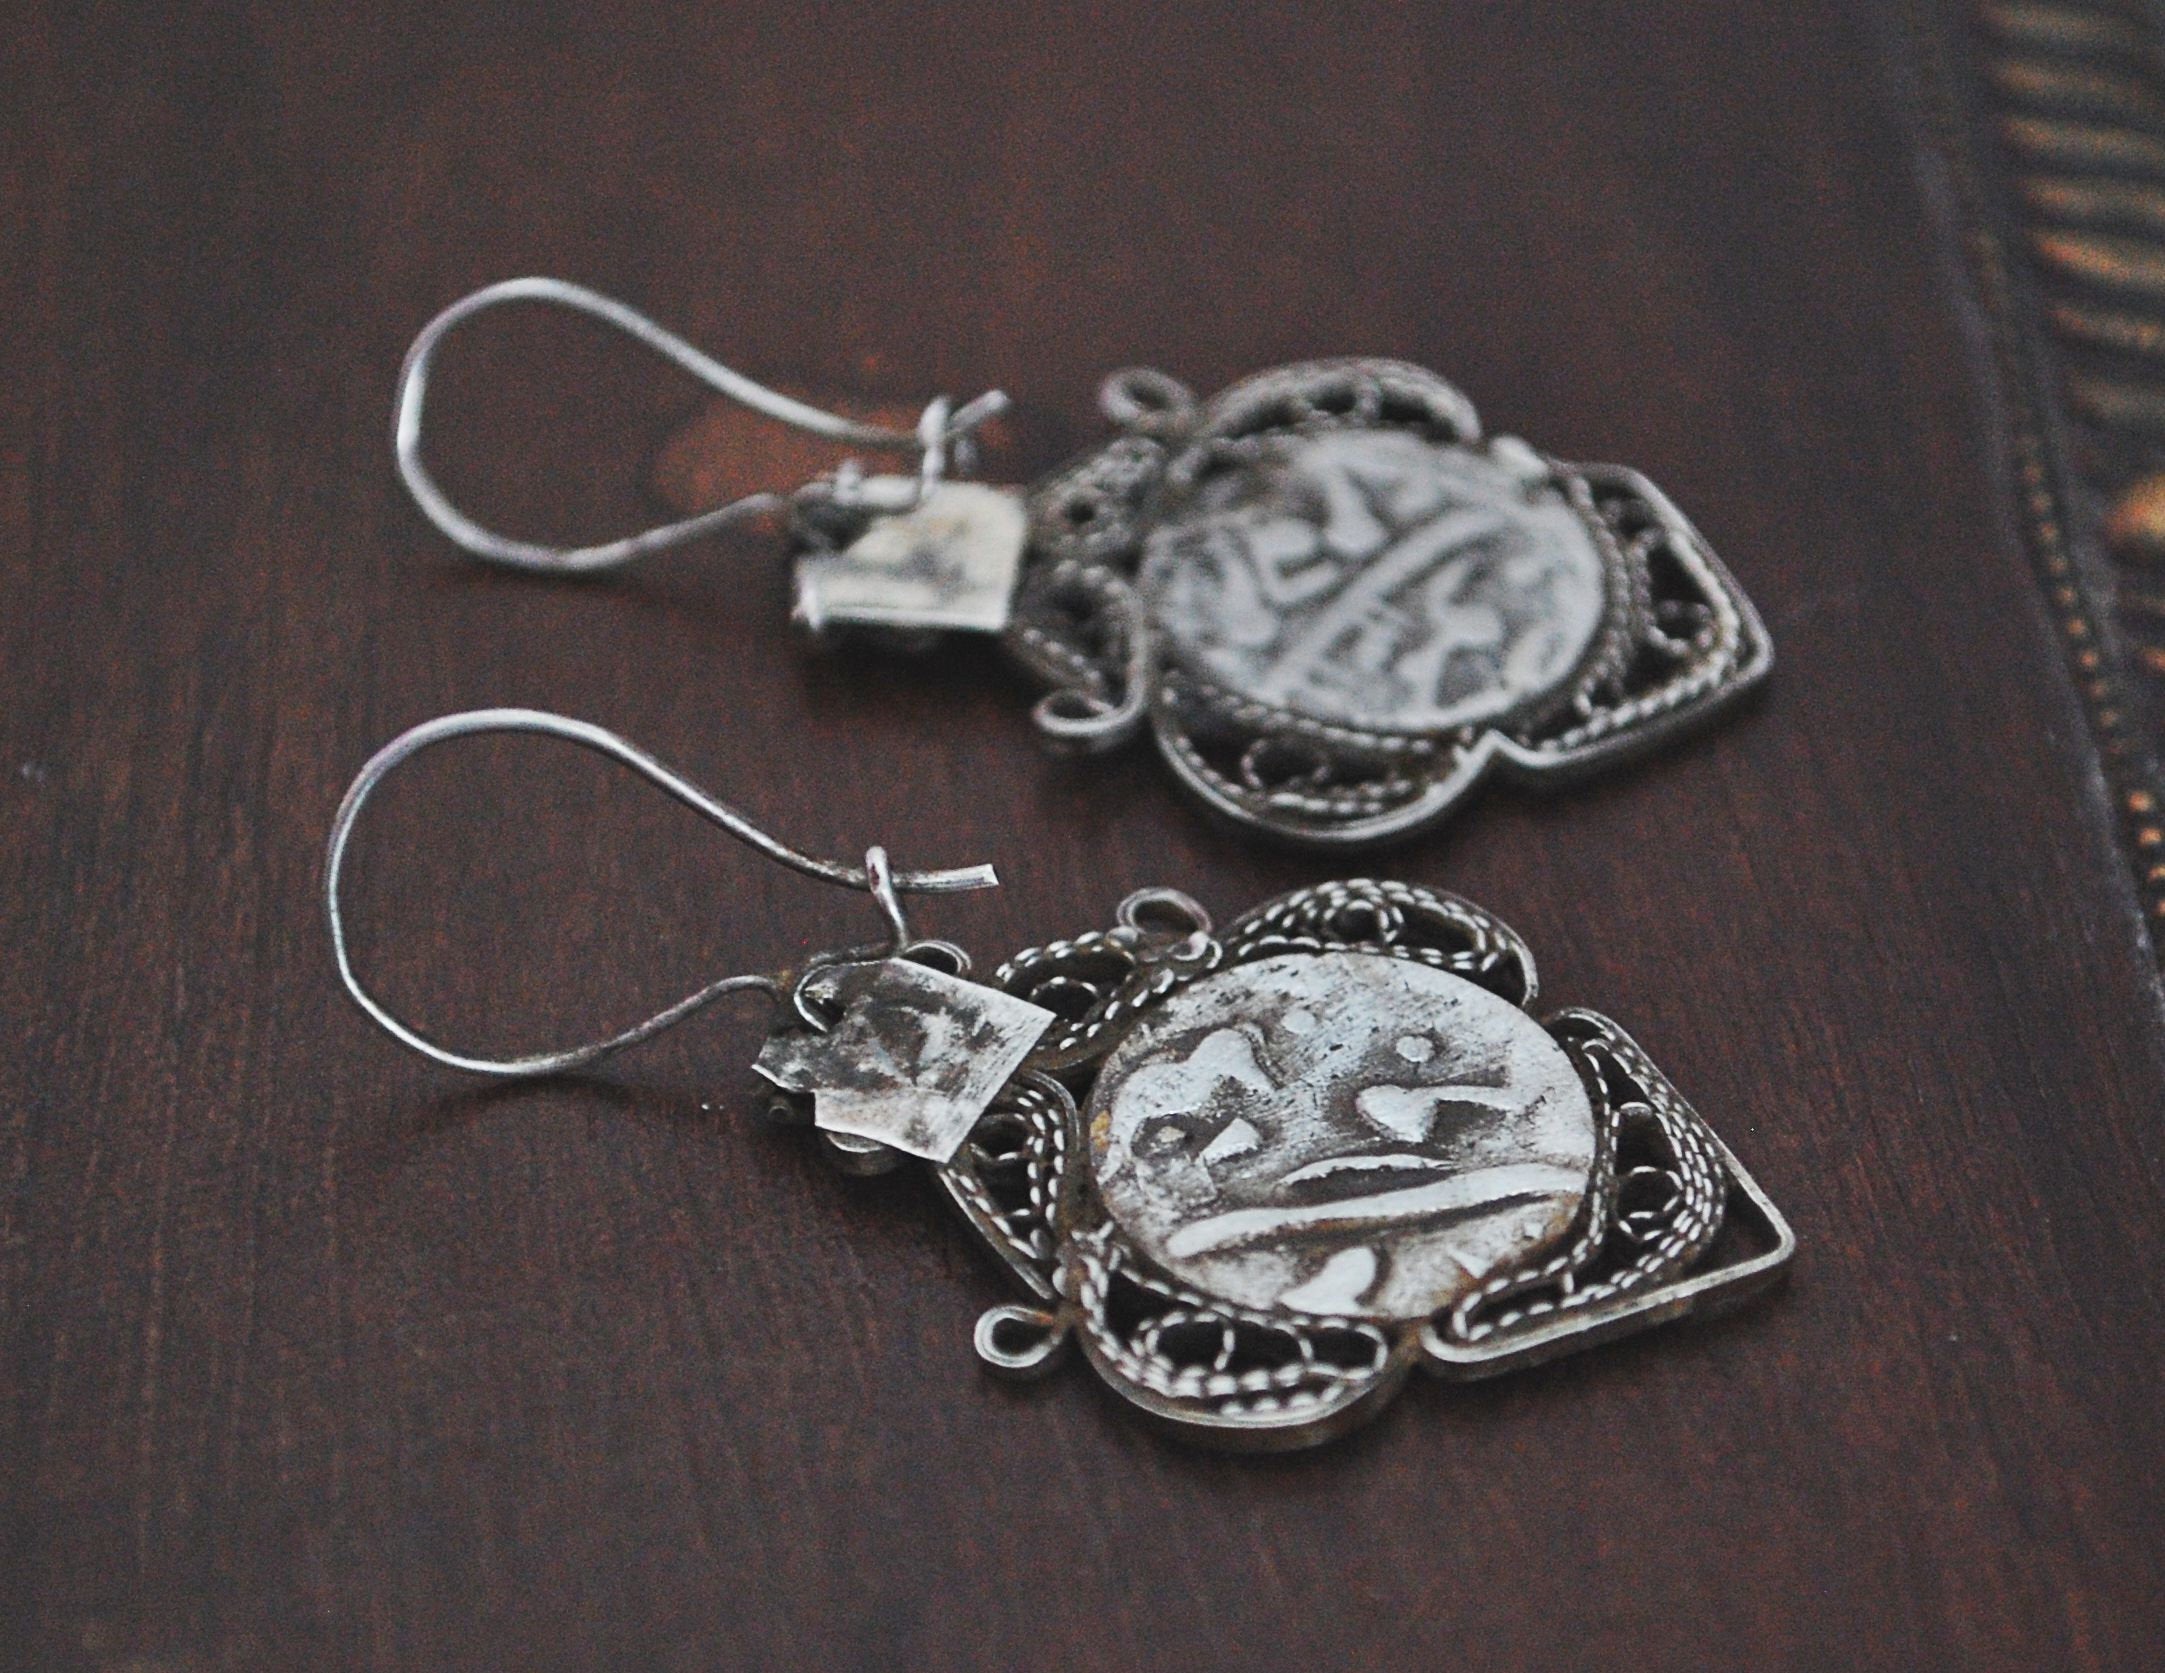 Afghani Coin Earrings with Coral - Kuchi Earrings - Tribal Earrings - Afghan Silver Earrings - Ethnic Jewelry